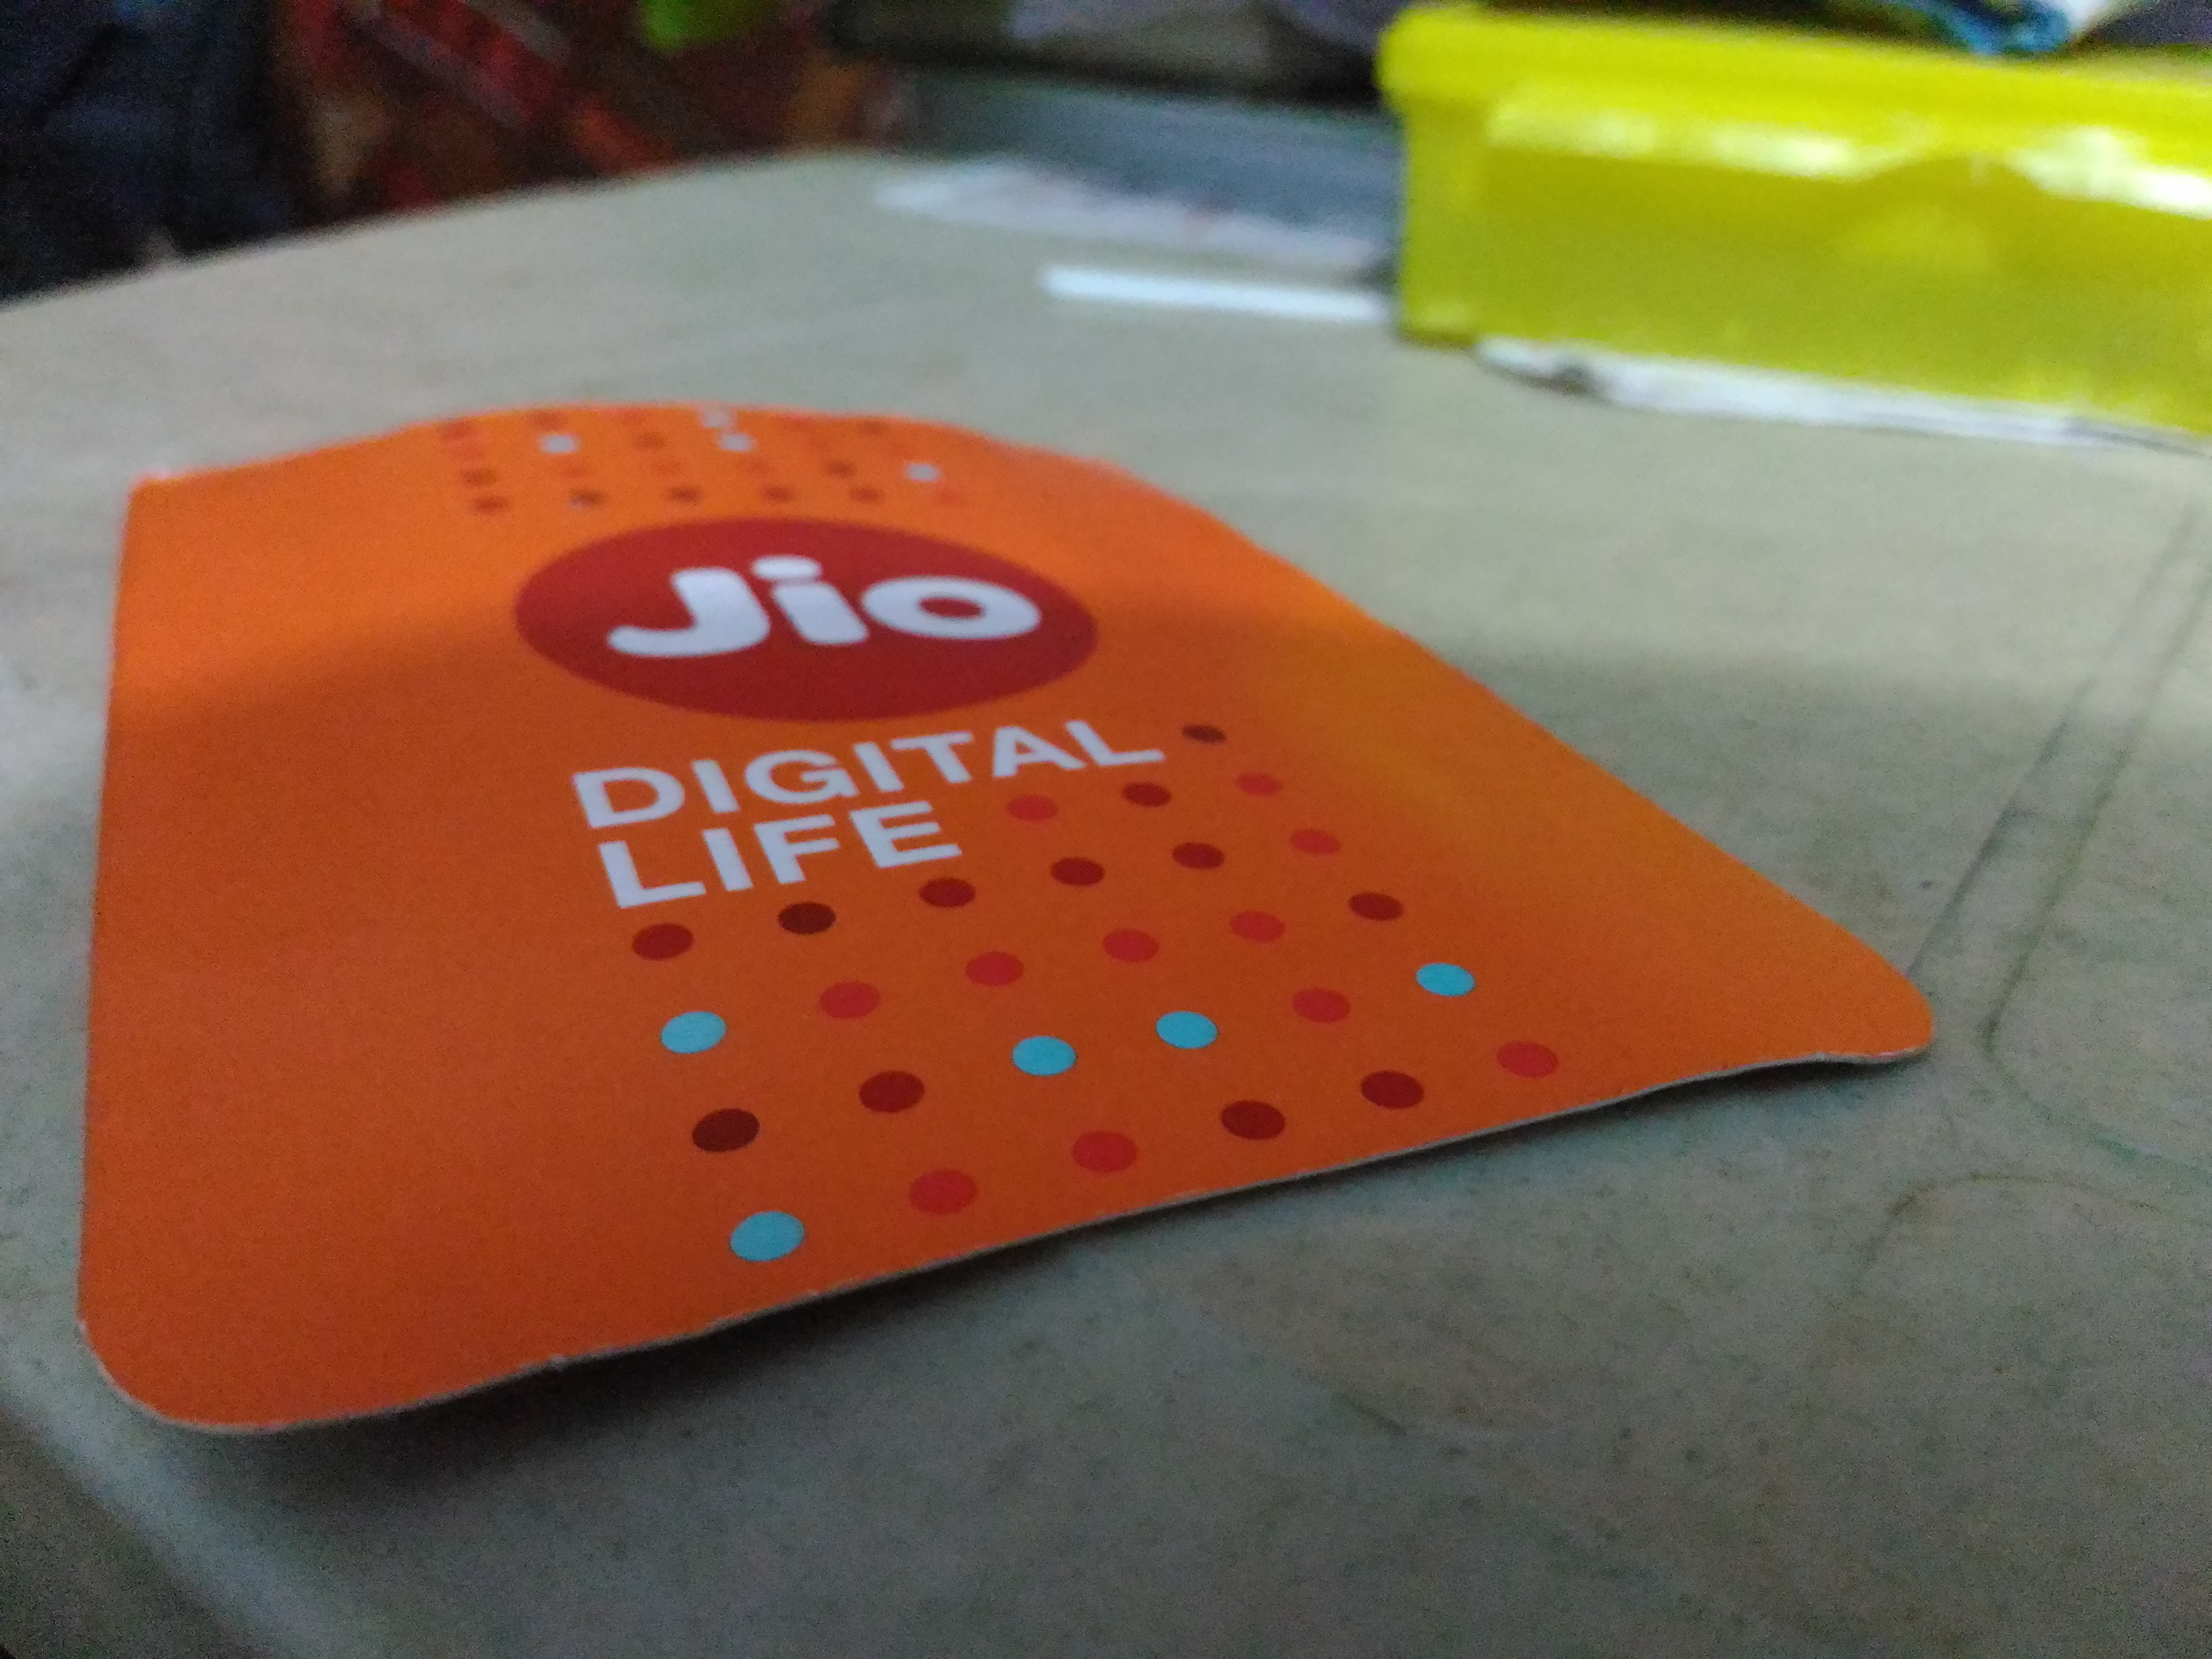 JioGigaFiber: Reliance announces Broadband Services to 1100 Cities